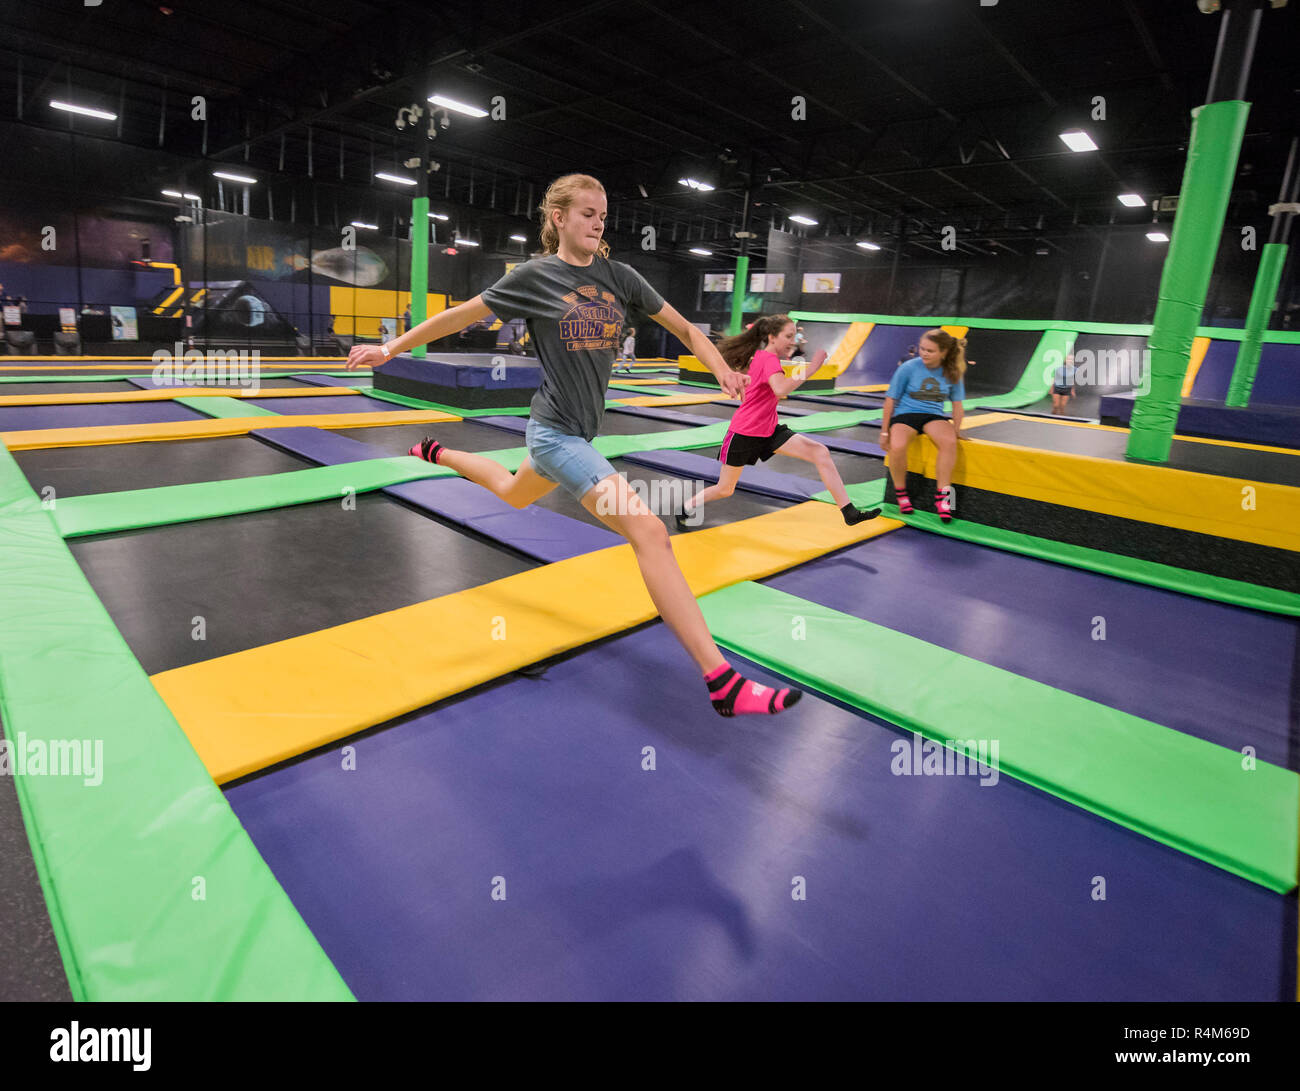 Children Trampoline Land Park With Professional Trampoline And ...